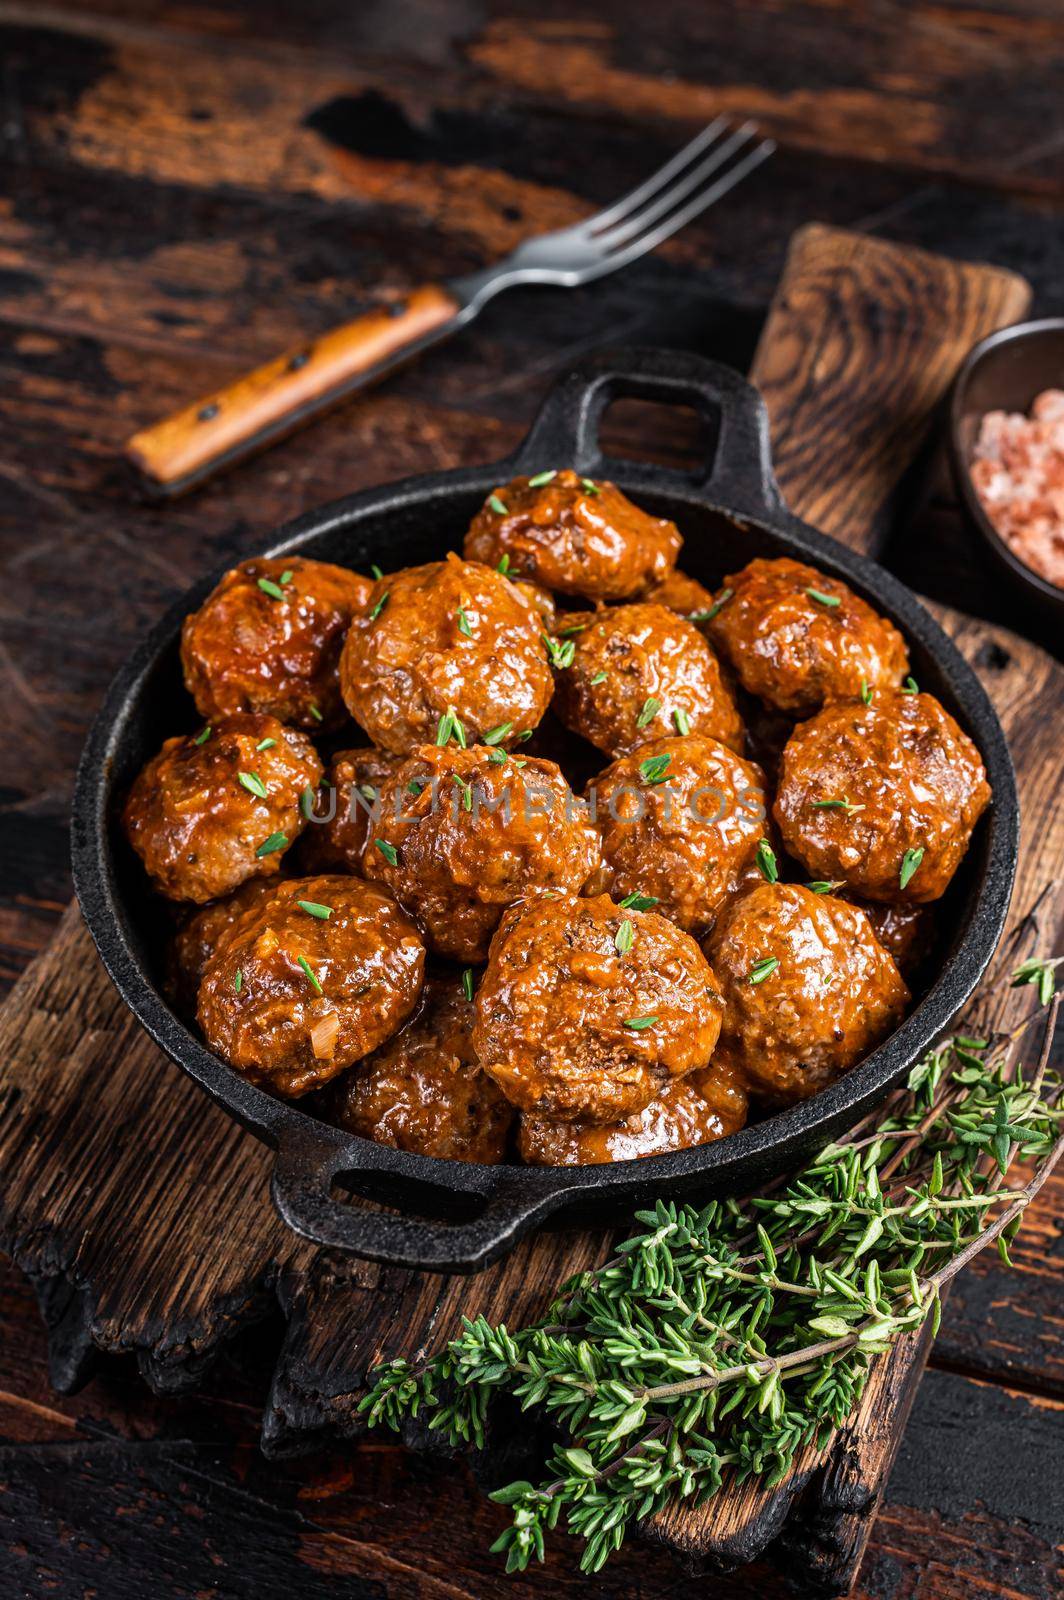 Meatballs in tomato sauce from beef and pork meat with thyme in rustic pan. Dark background. Top view.